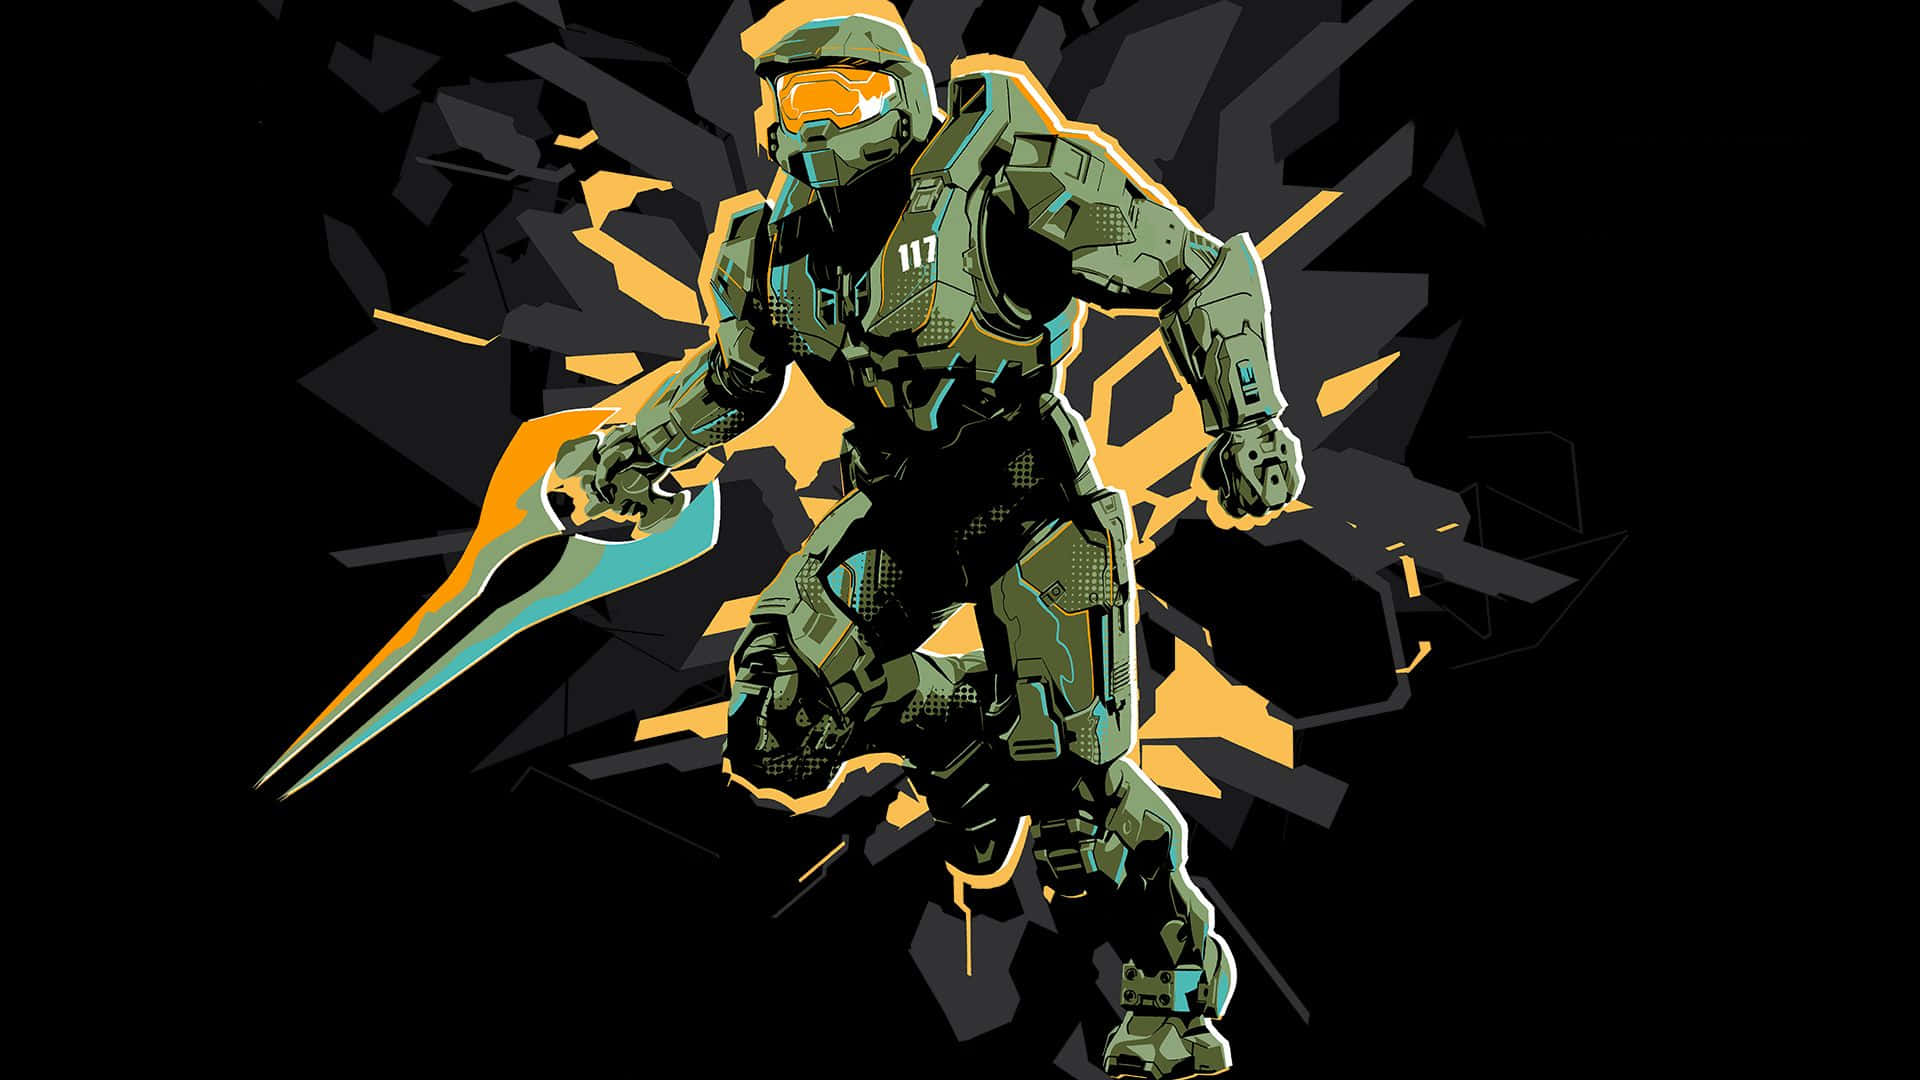 Master Chief standing tall in Halo Infinite